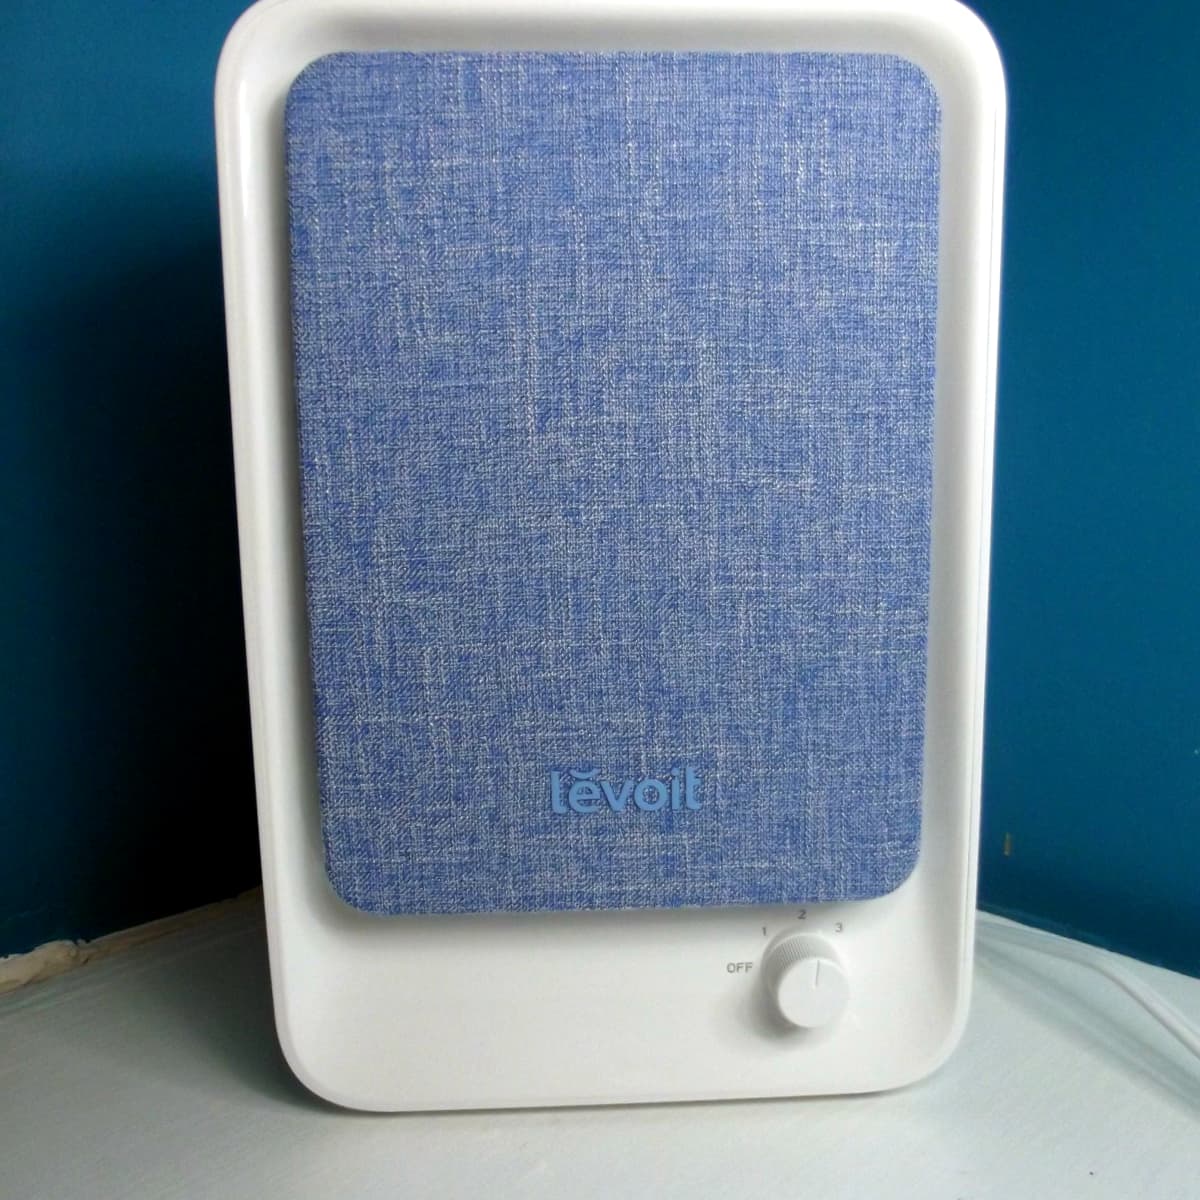 Levoit HEPA Filter for Air Purifier & Reviews